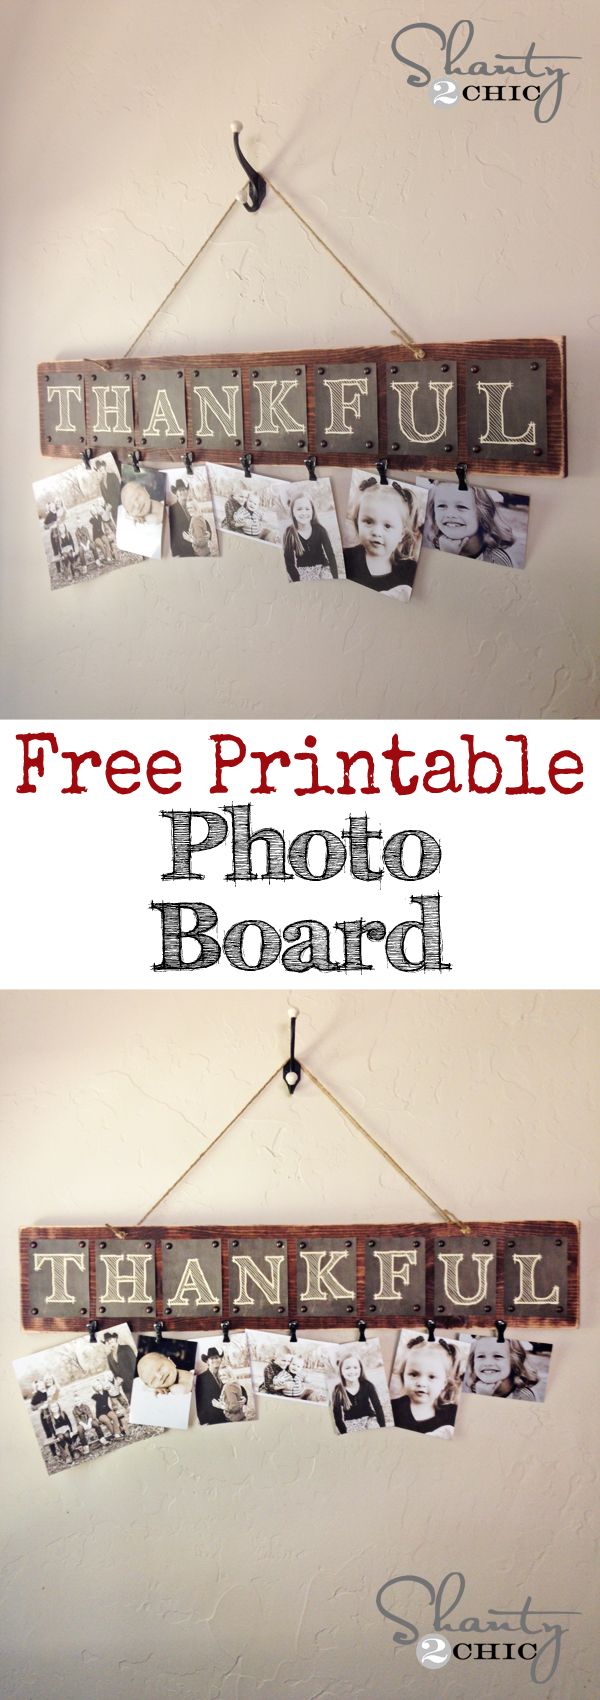 DIY Thankful Photo Board with Free Printable Letters 